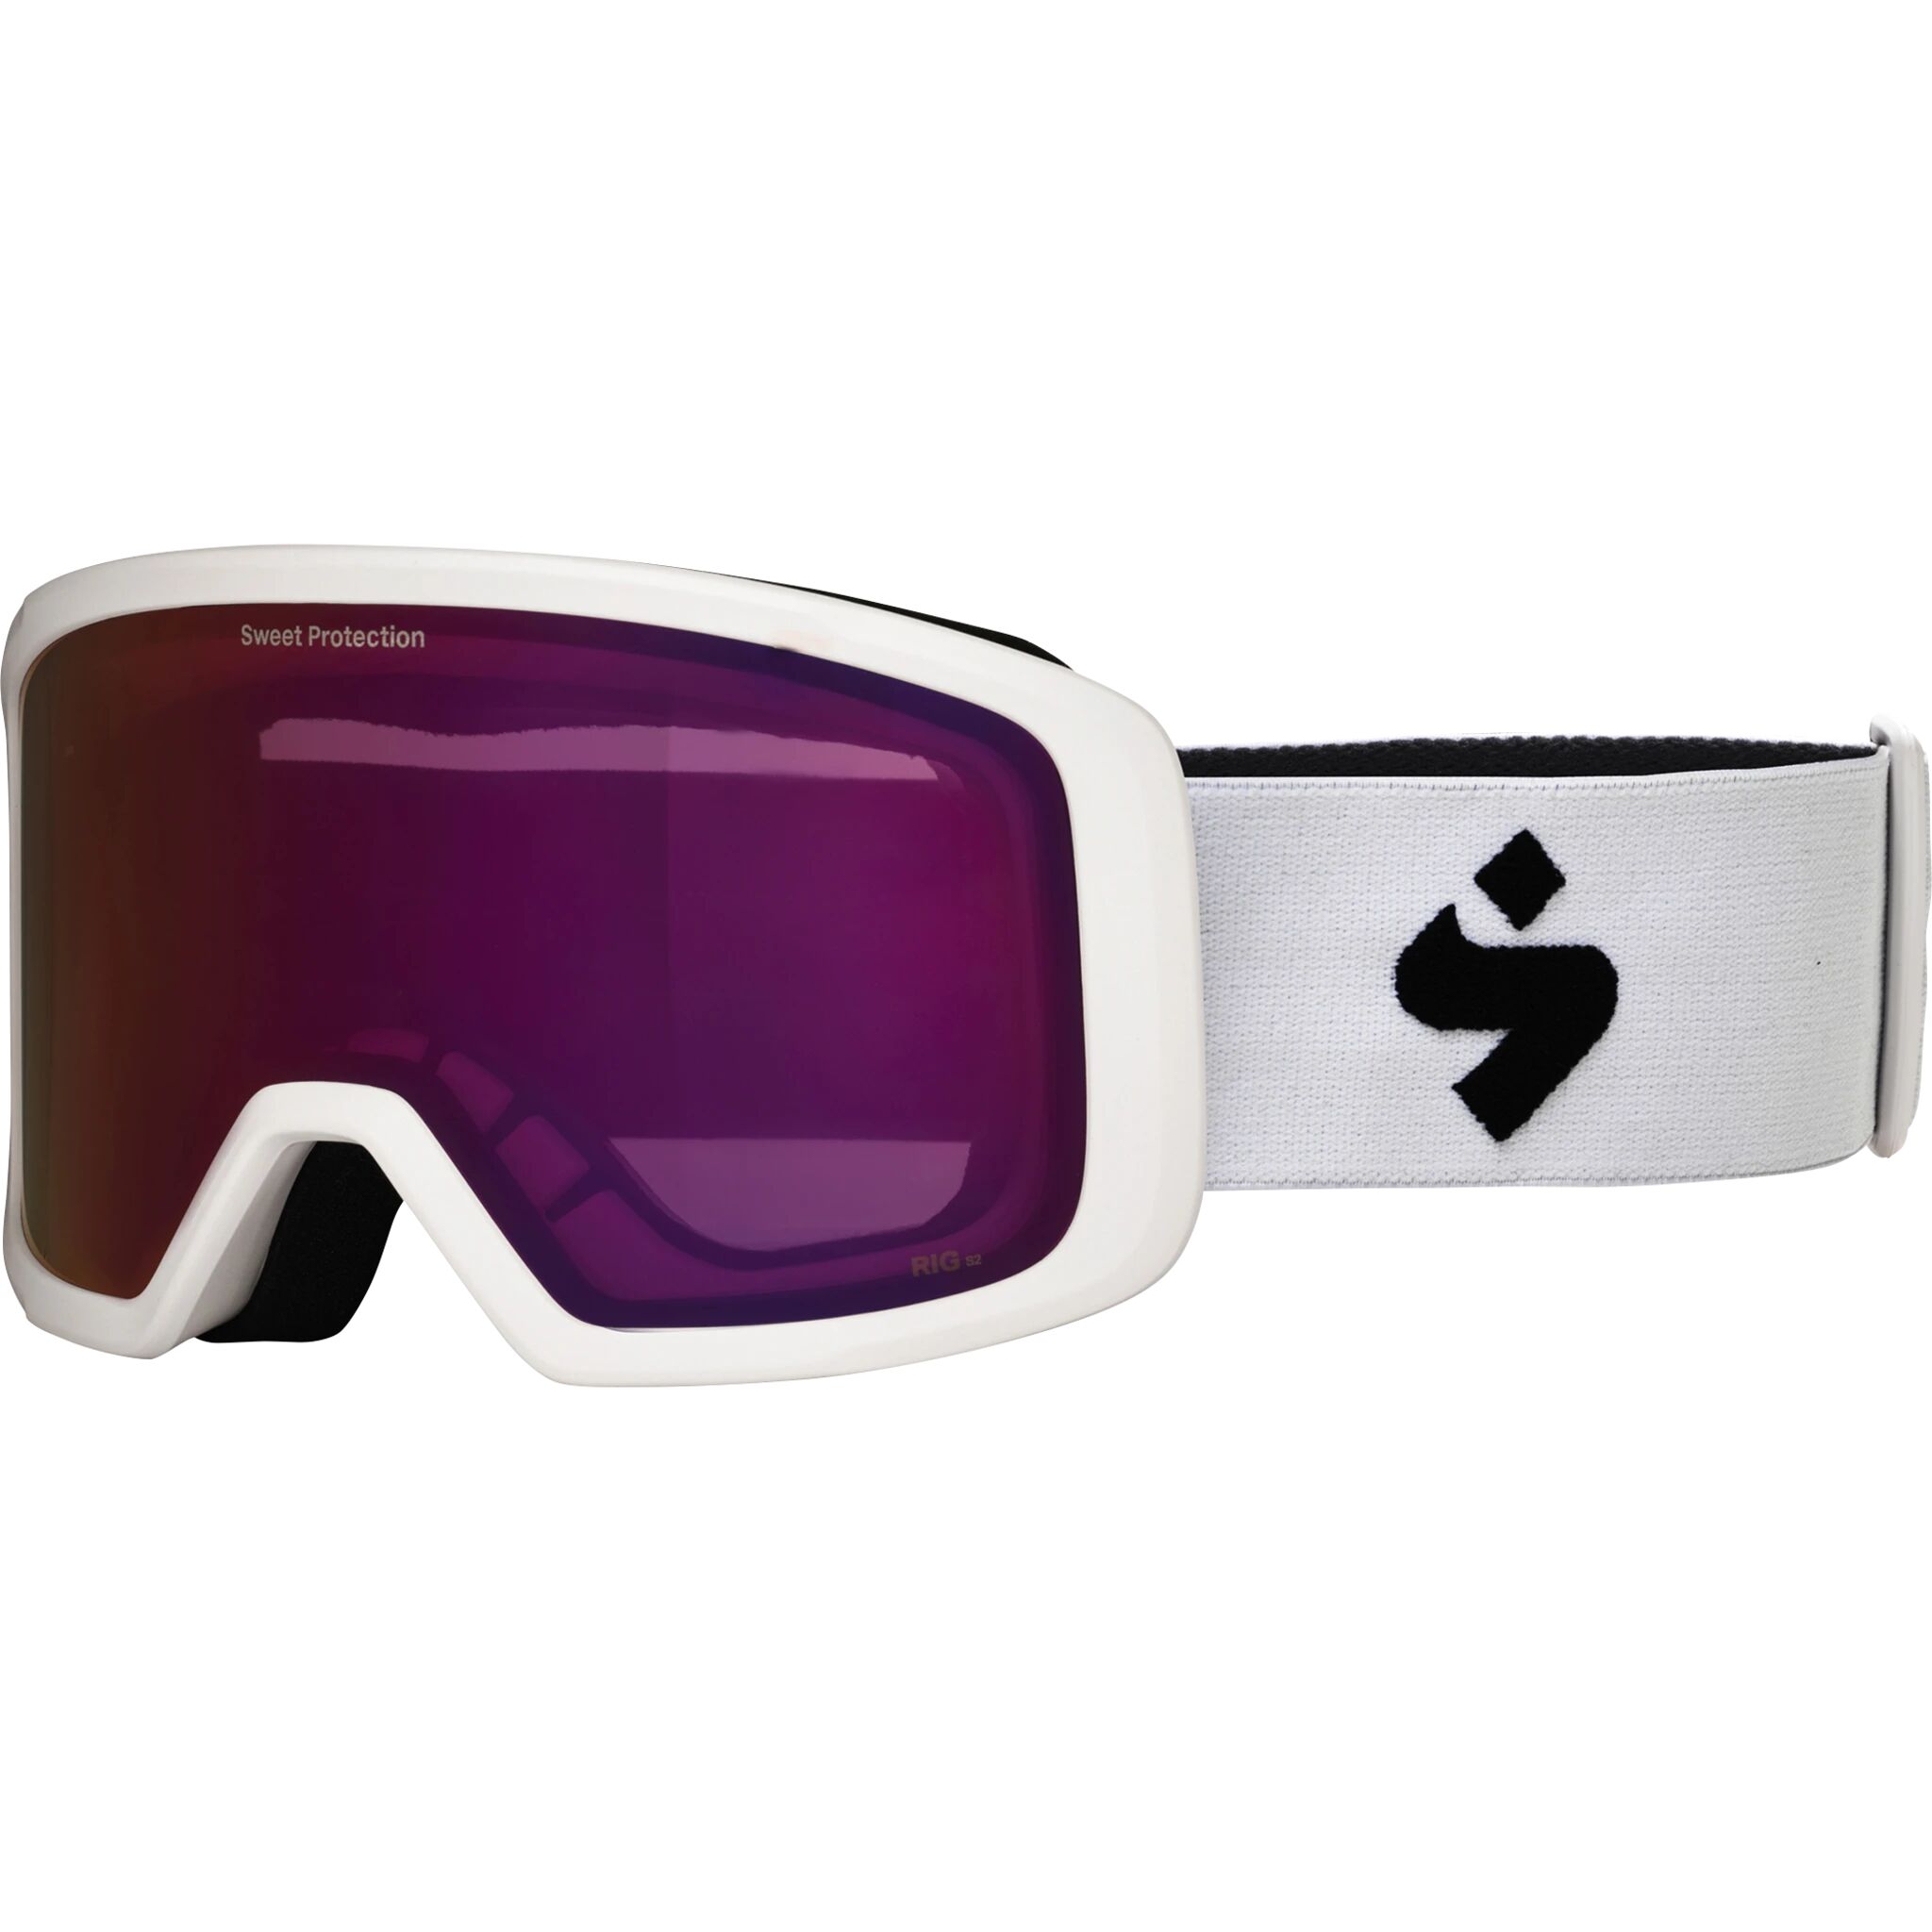 Sweet Protection Goggles Firewall RIG Reflect 21/22, alpinbrille senior One Size RIG Bixbite/Satin Wh